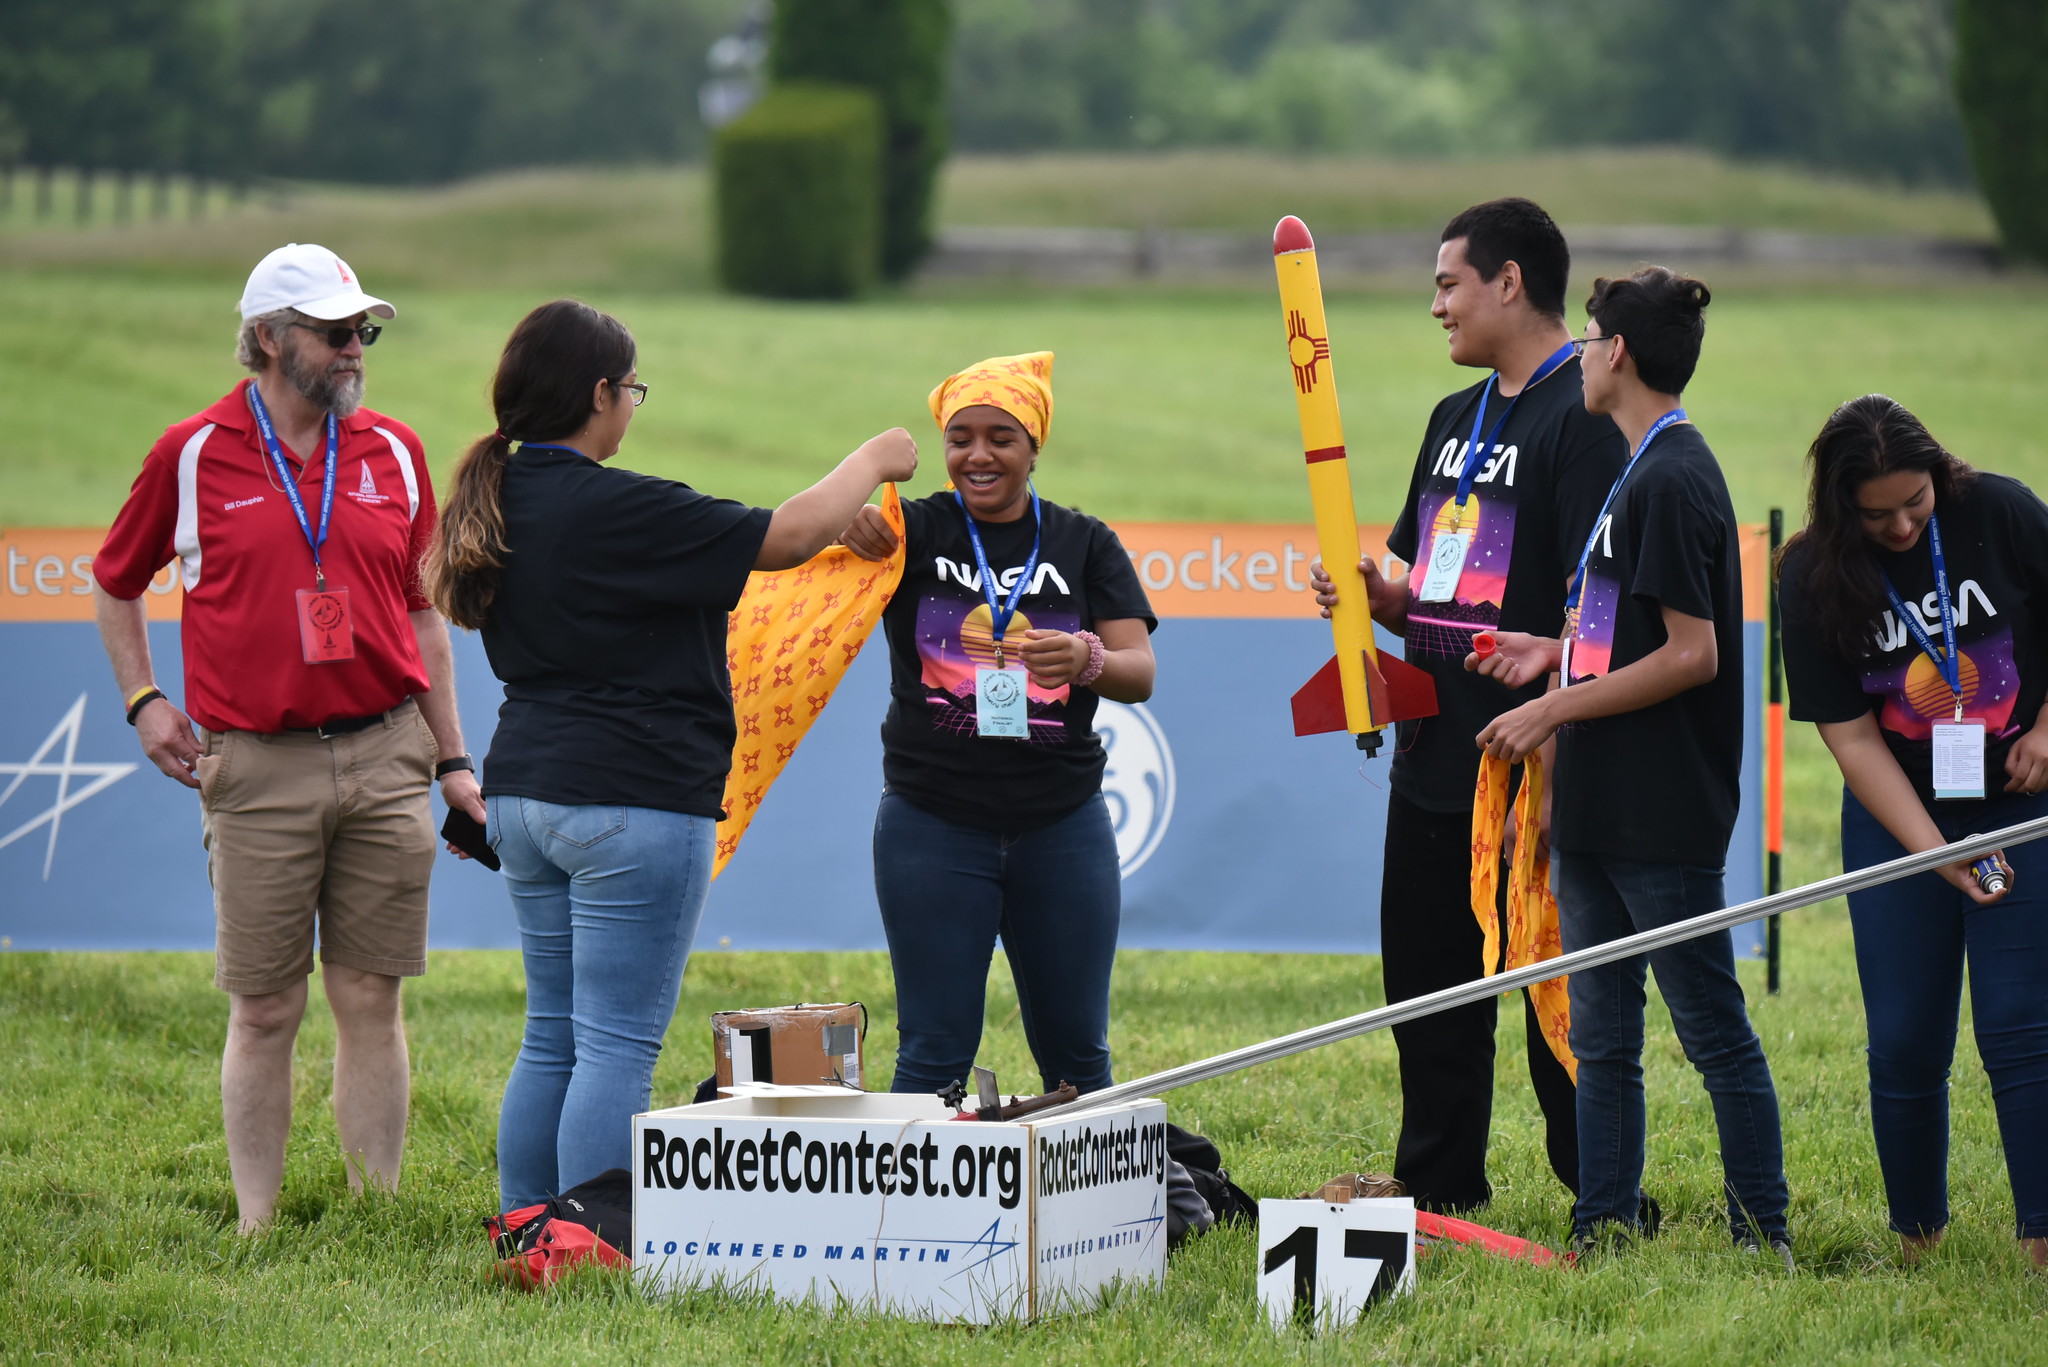 How To Compete | The American Rocketry Challenge